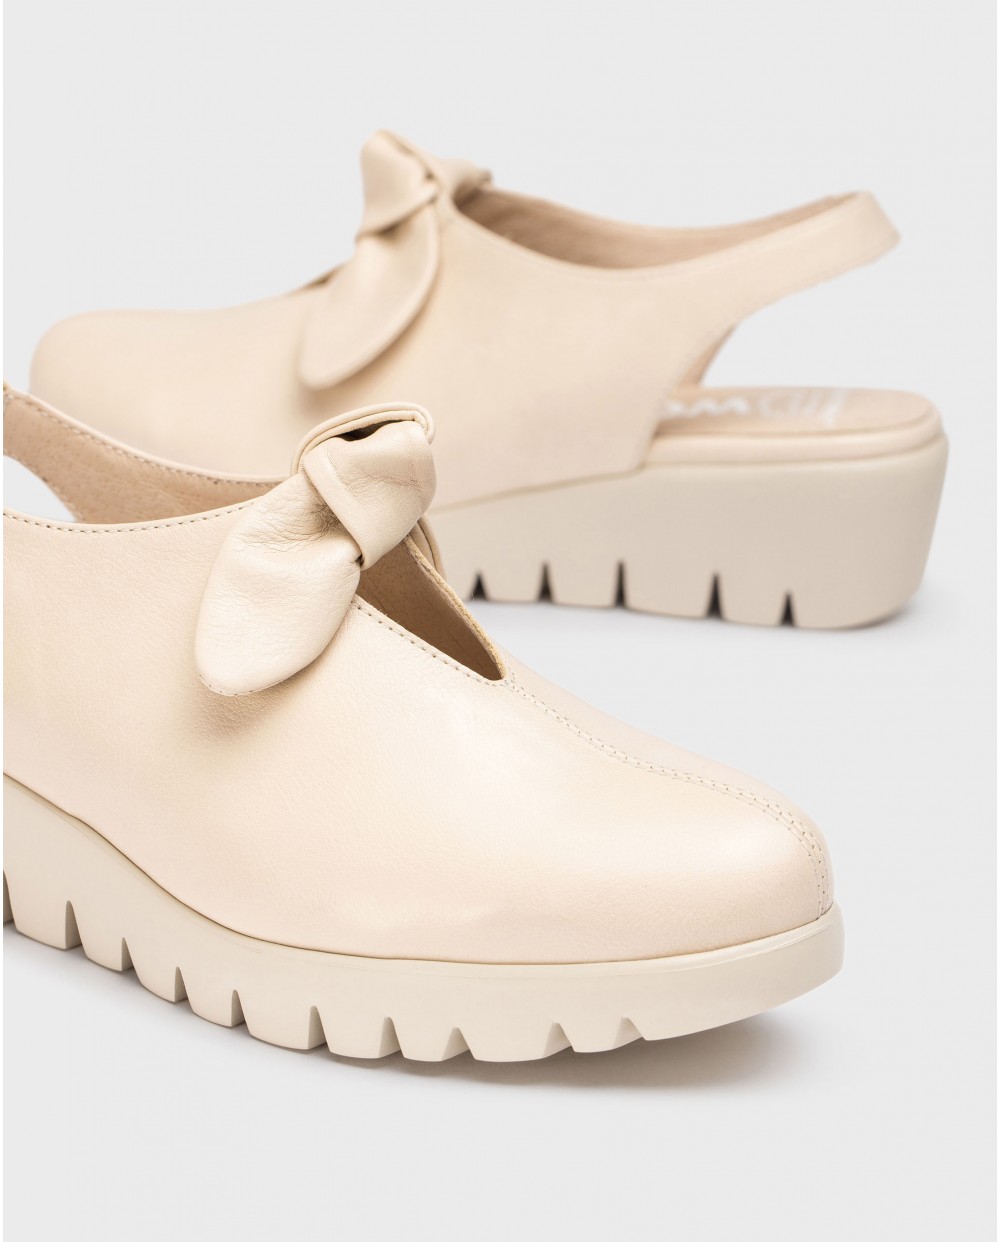 Natural shoes with bow detail